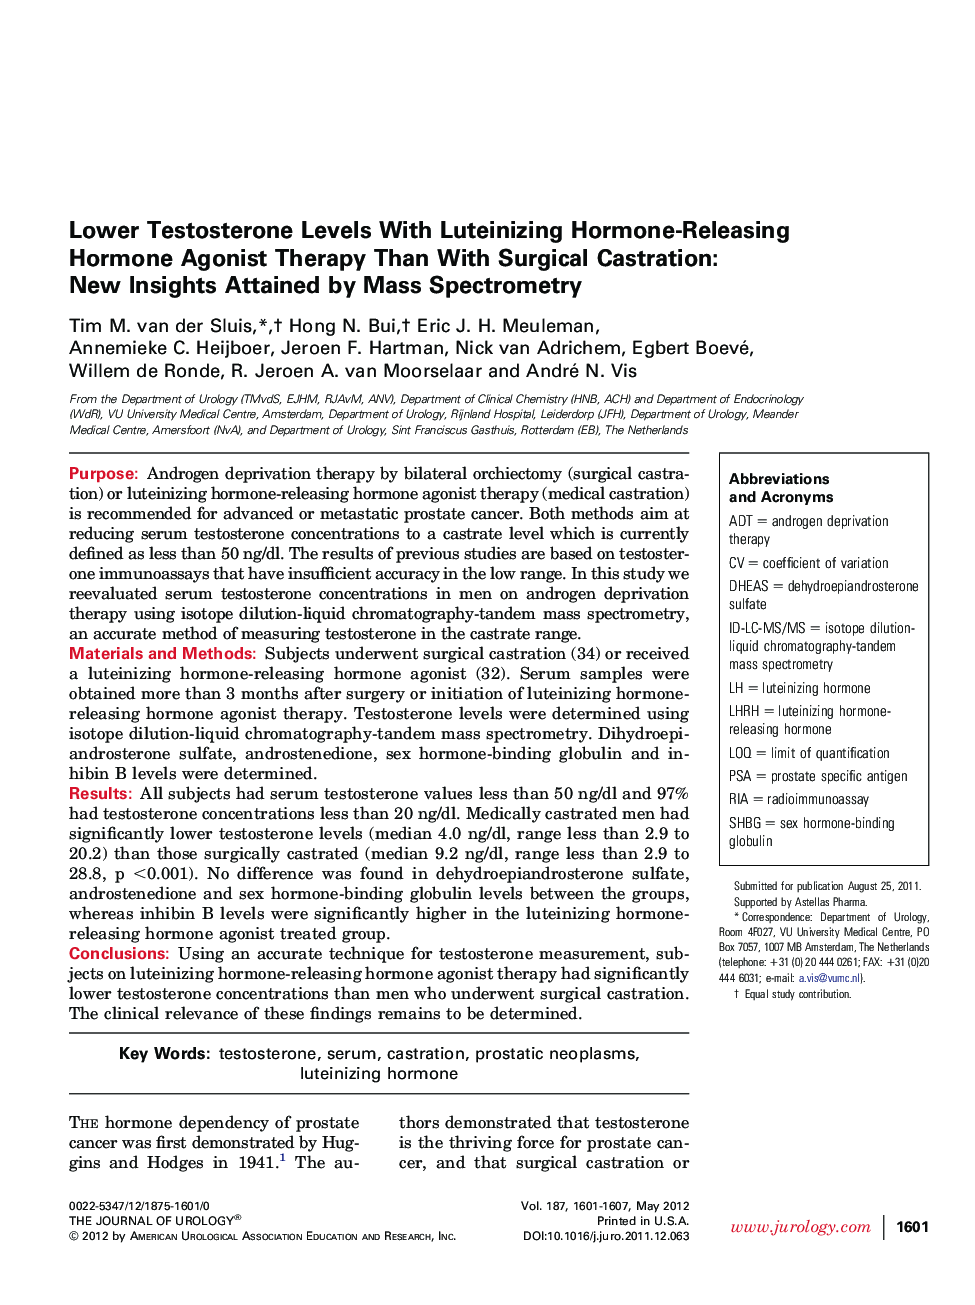 Lower Testosterone Levels With Luteinizing Hormone-Releasing Hormone Agonist Therapy Than With Surgical Castration: New Insights Attained by Mass Spectrometry 